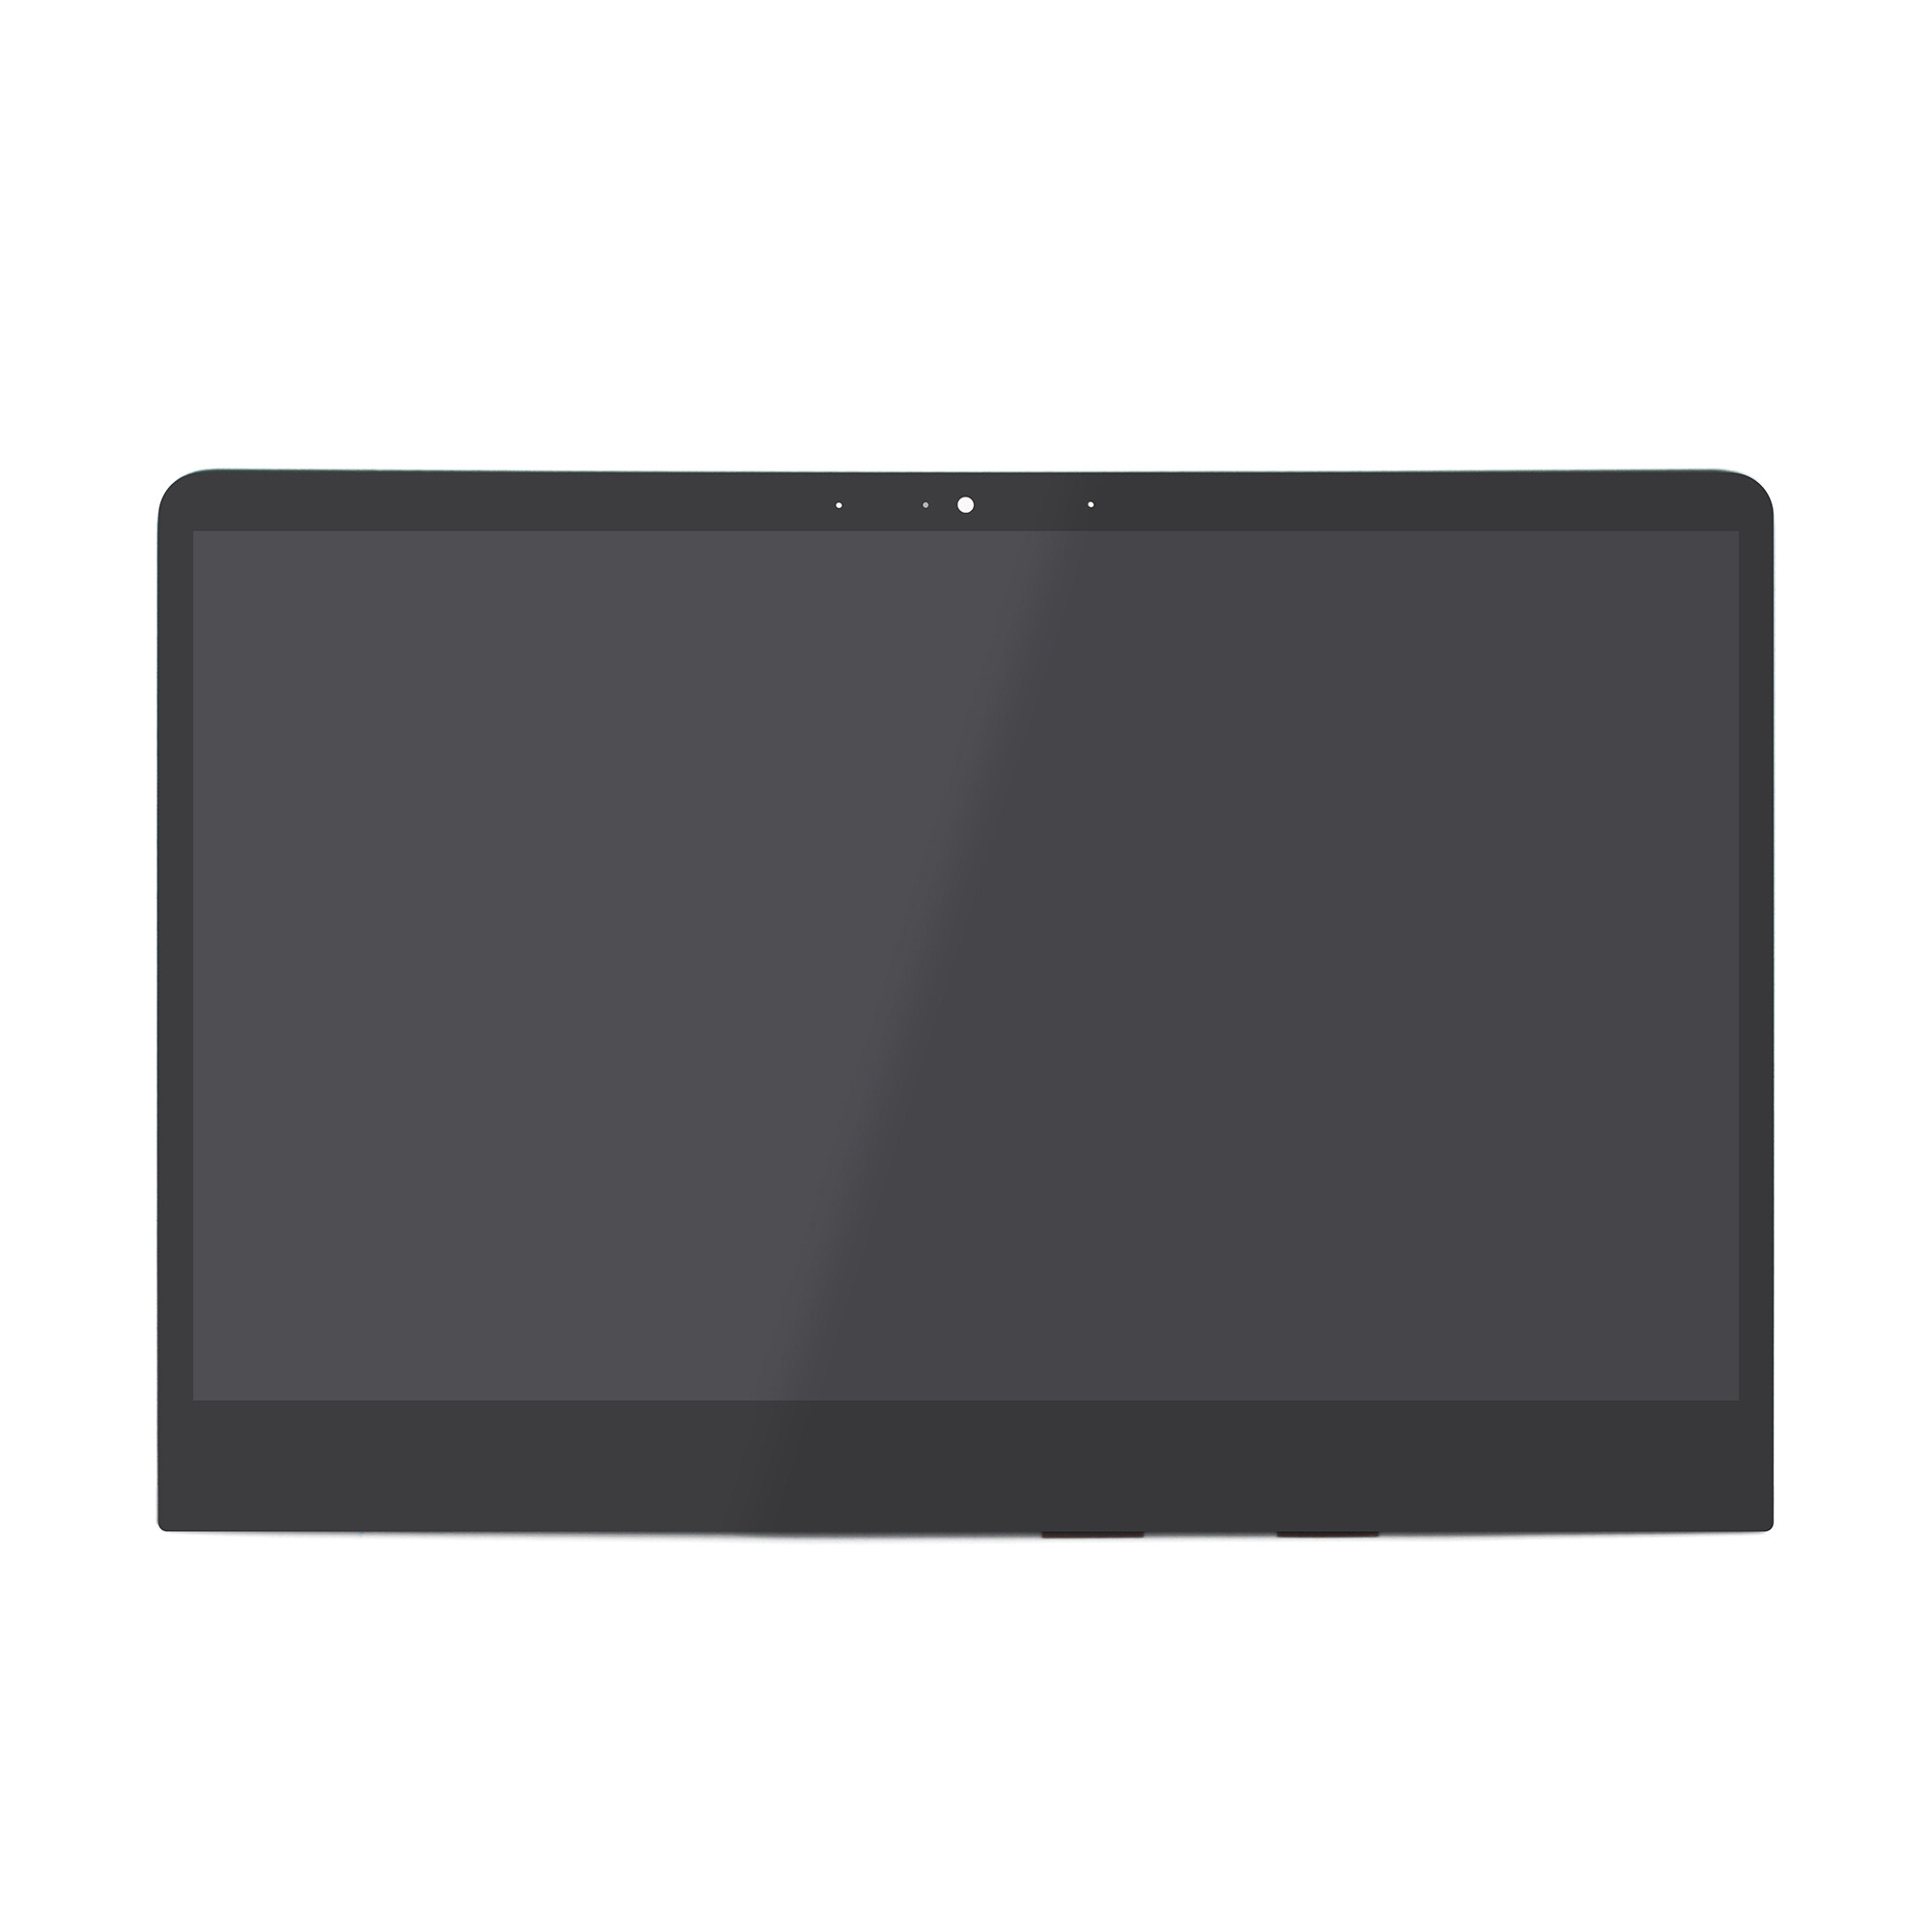 For ASUS Vivobook Flip 14 TP410UA-DB71T TP410UA-DB51T LCD Monitor Touch Screen Digitizer Assembly 1920x1080